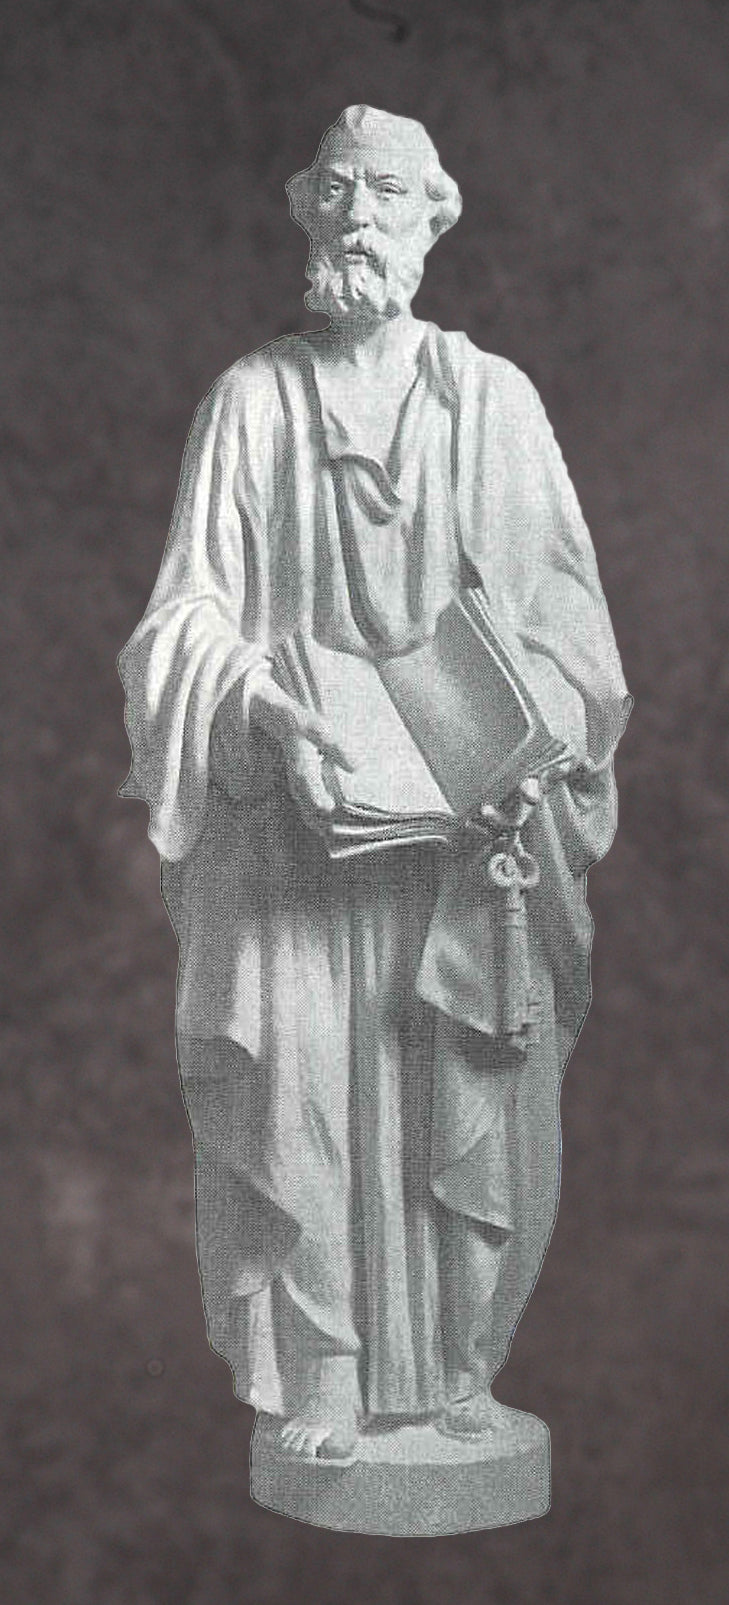 Saint Peter Marble Statue Style 1 - 60”H